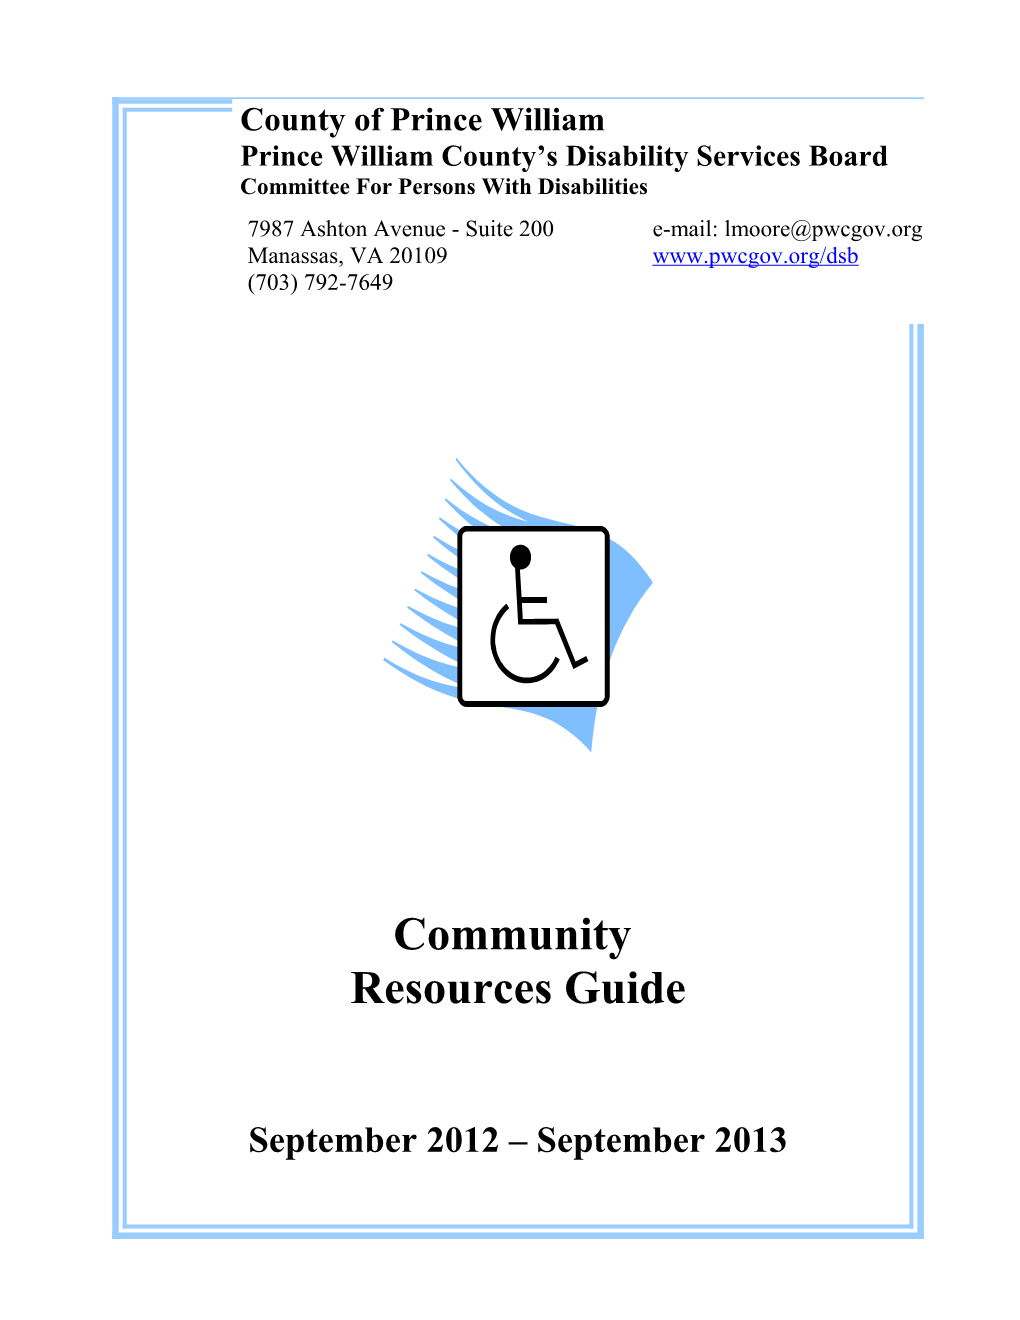 Prince William County Disability Services Board